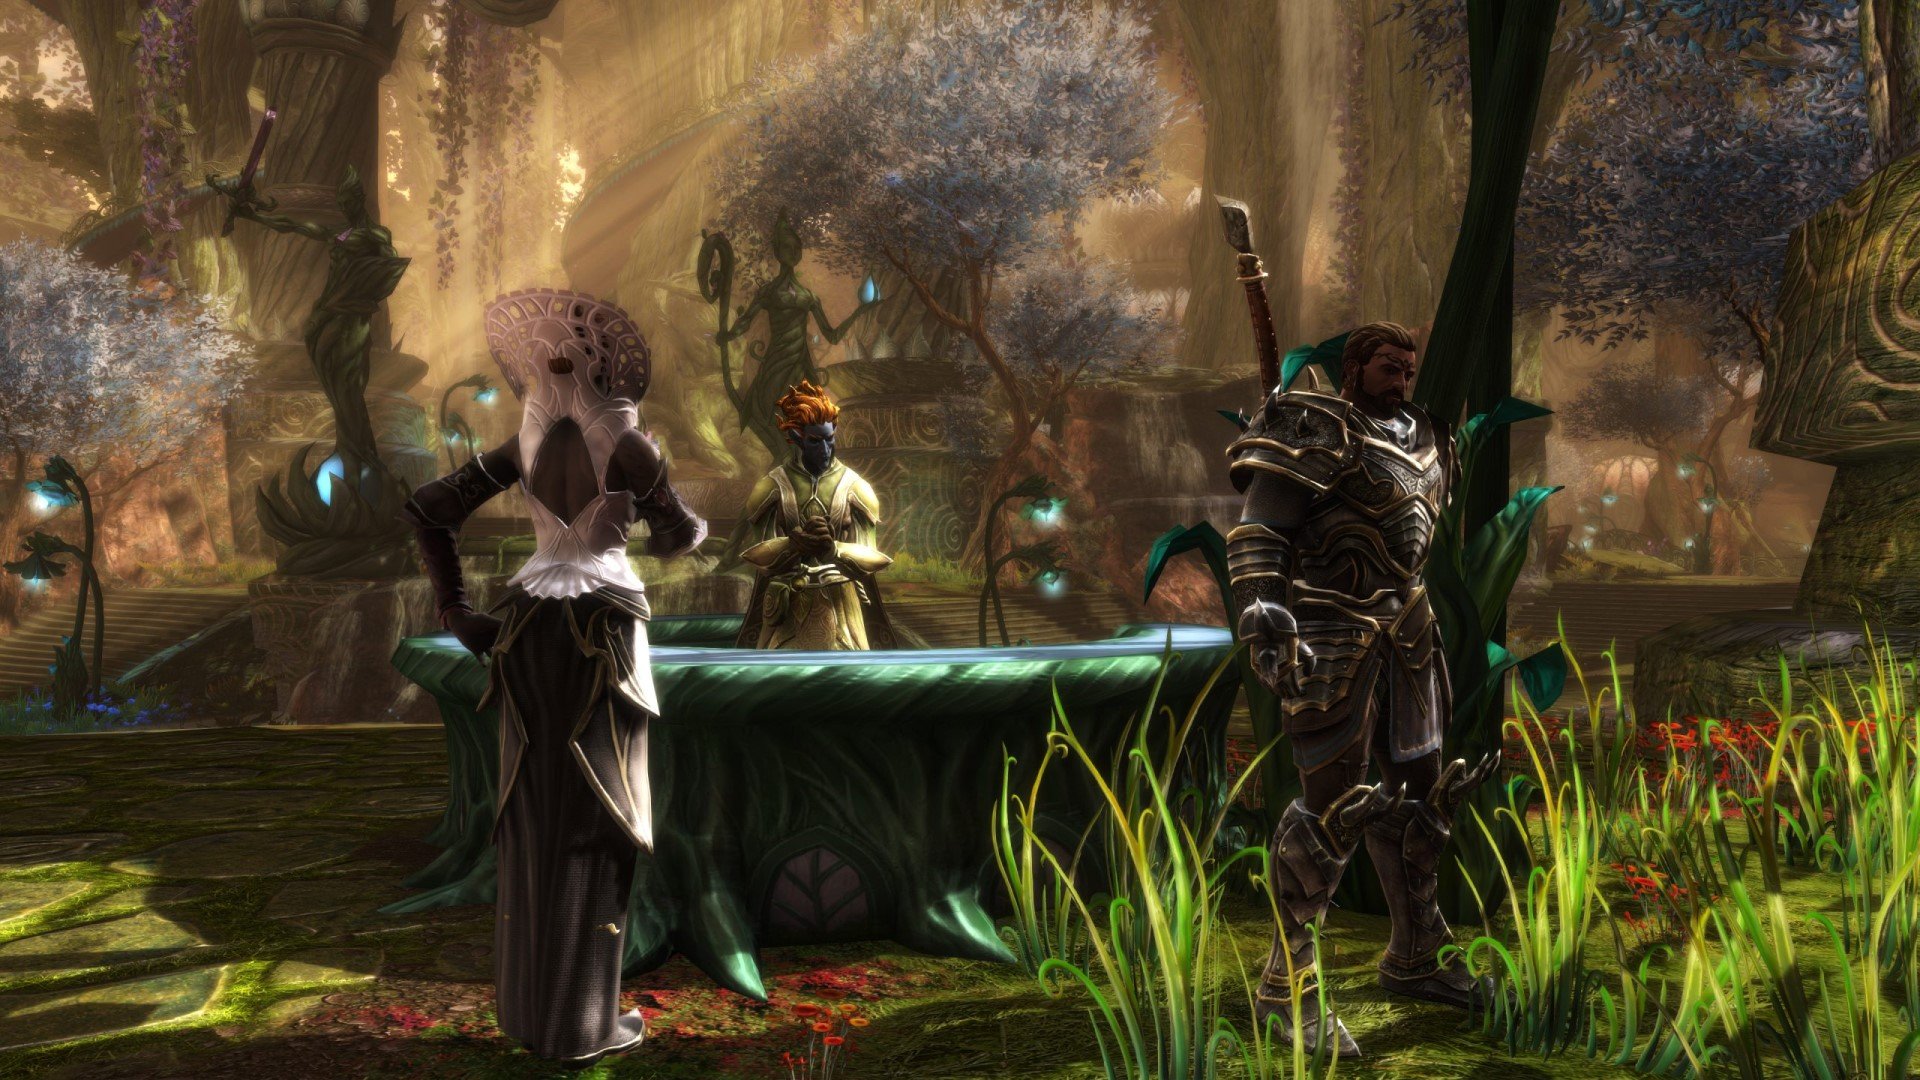 An elf, warrior, and mage standing around a table in a magical forest